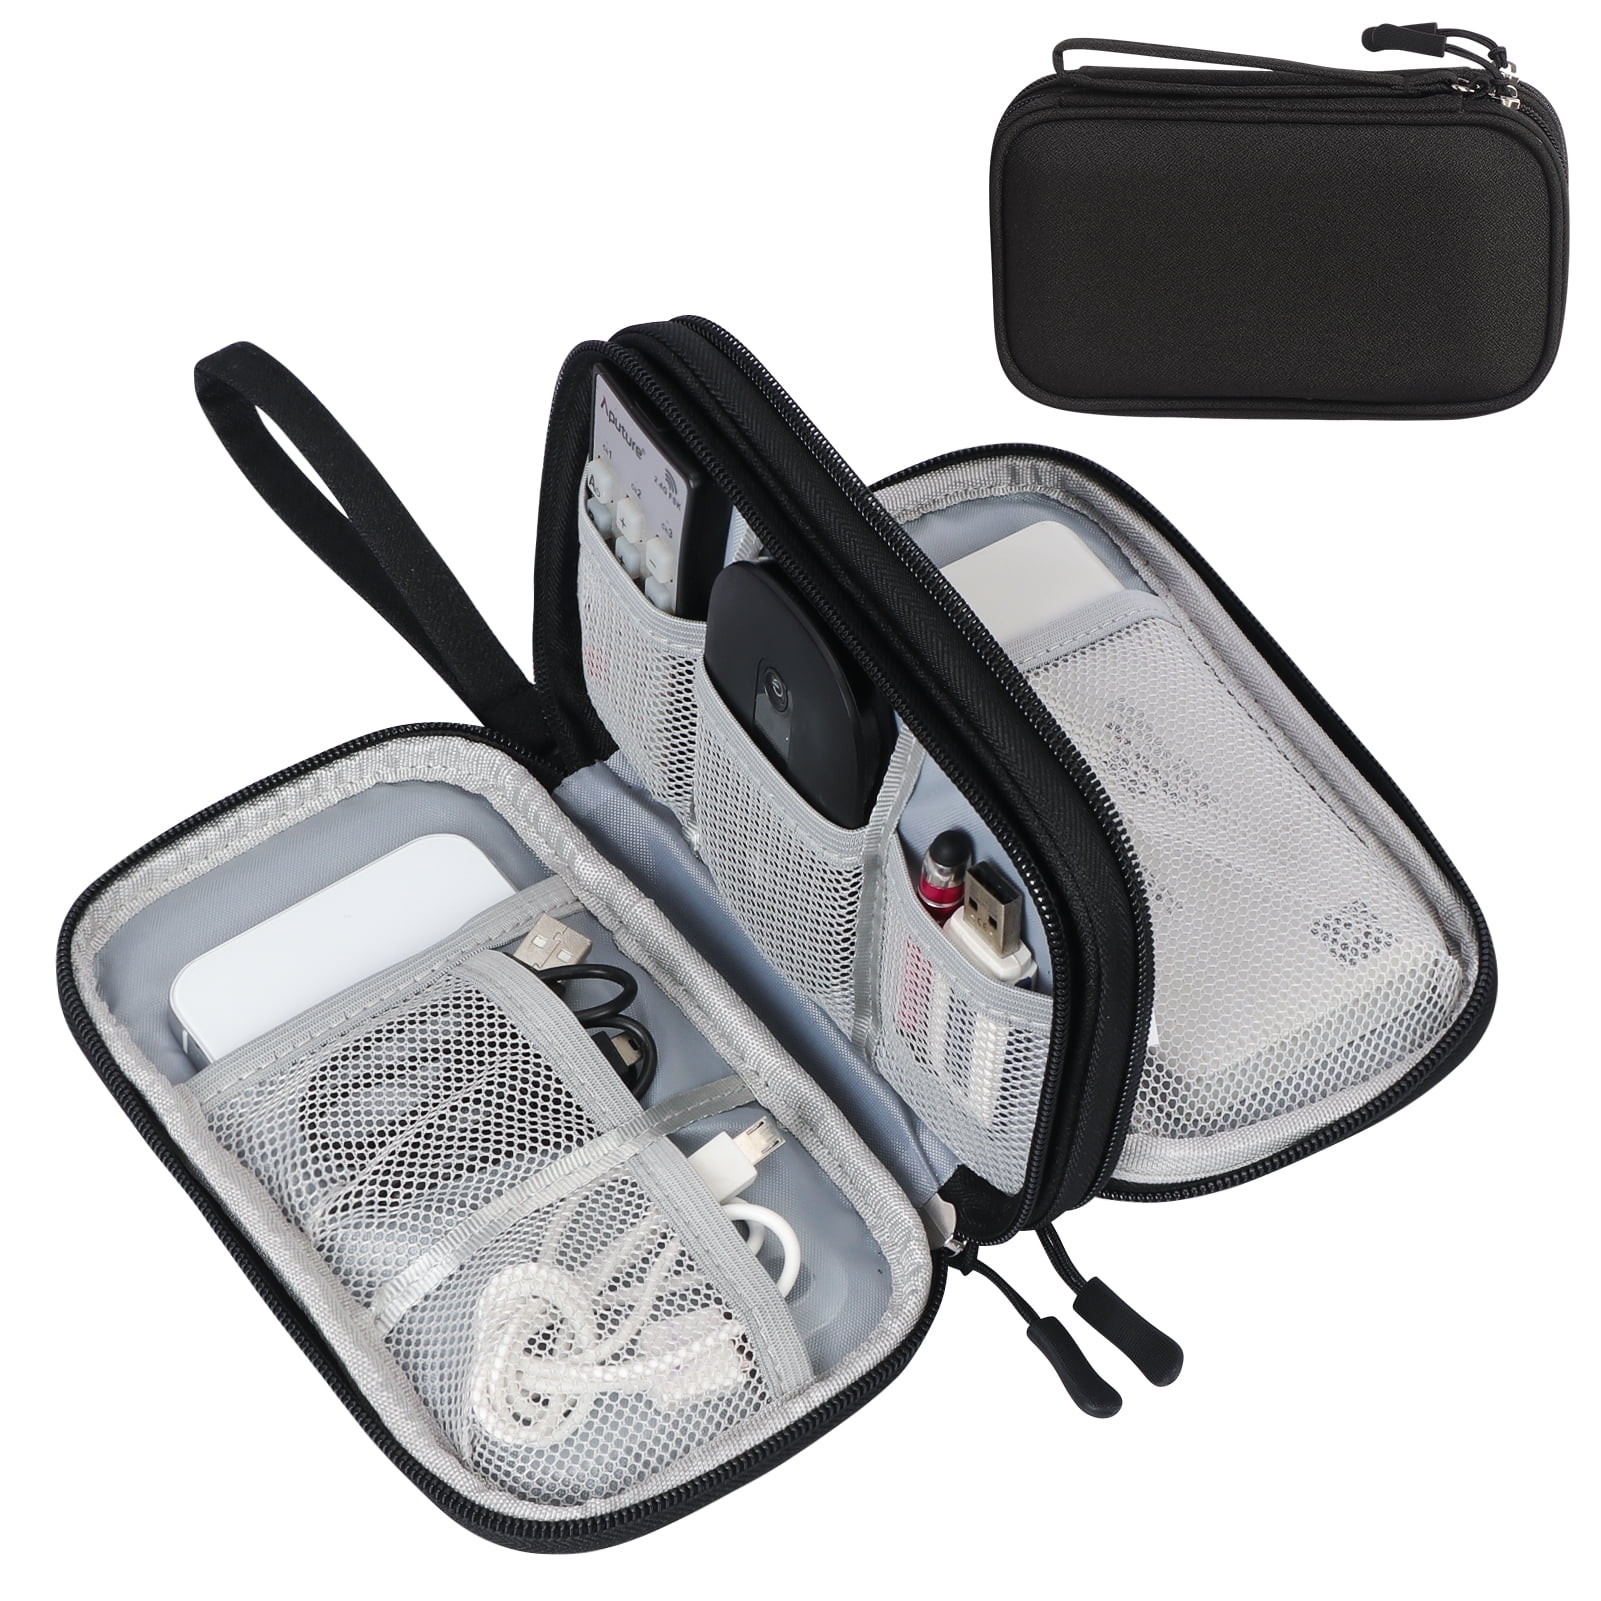 S/M/L Storage Bag for USB Cable Charger Data Cable Travel Box Bag 